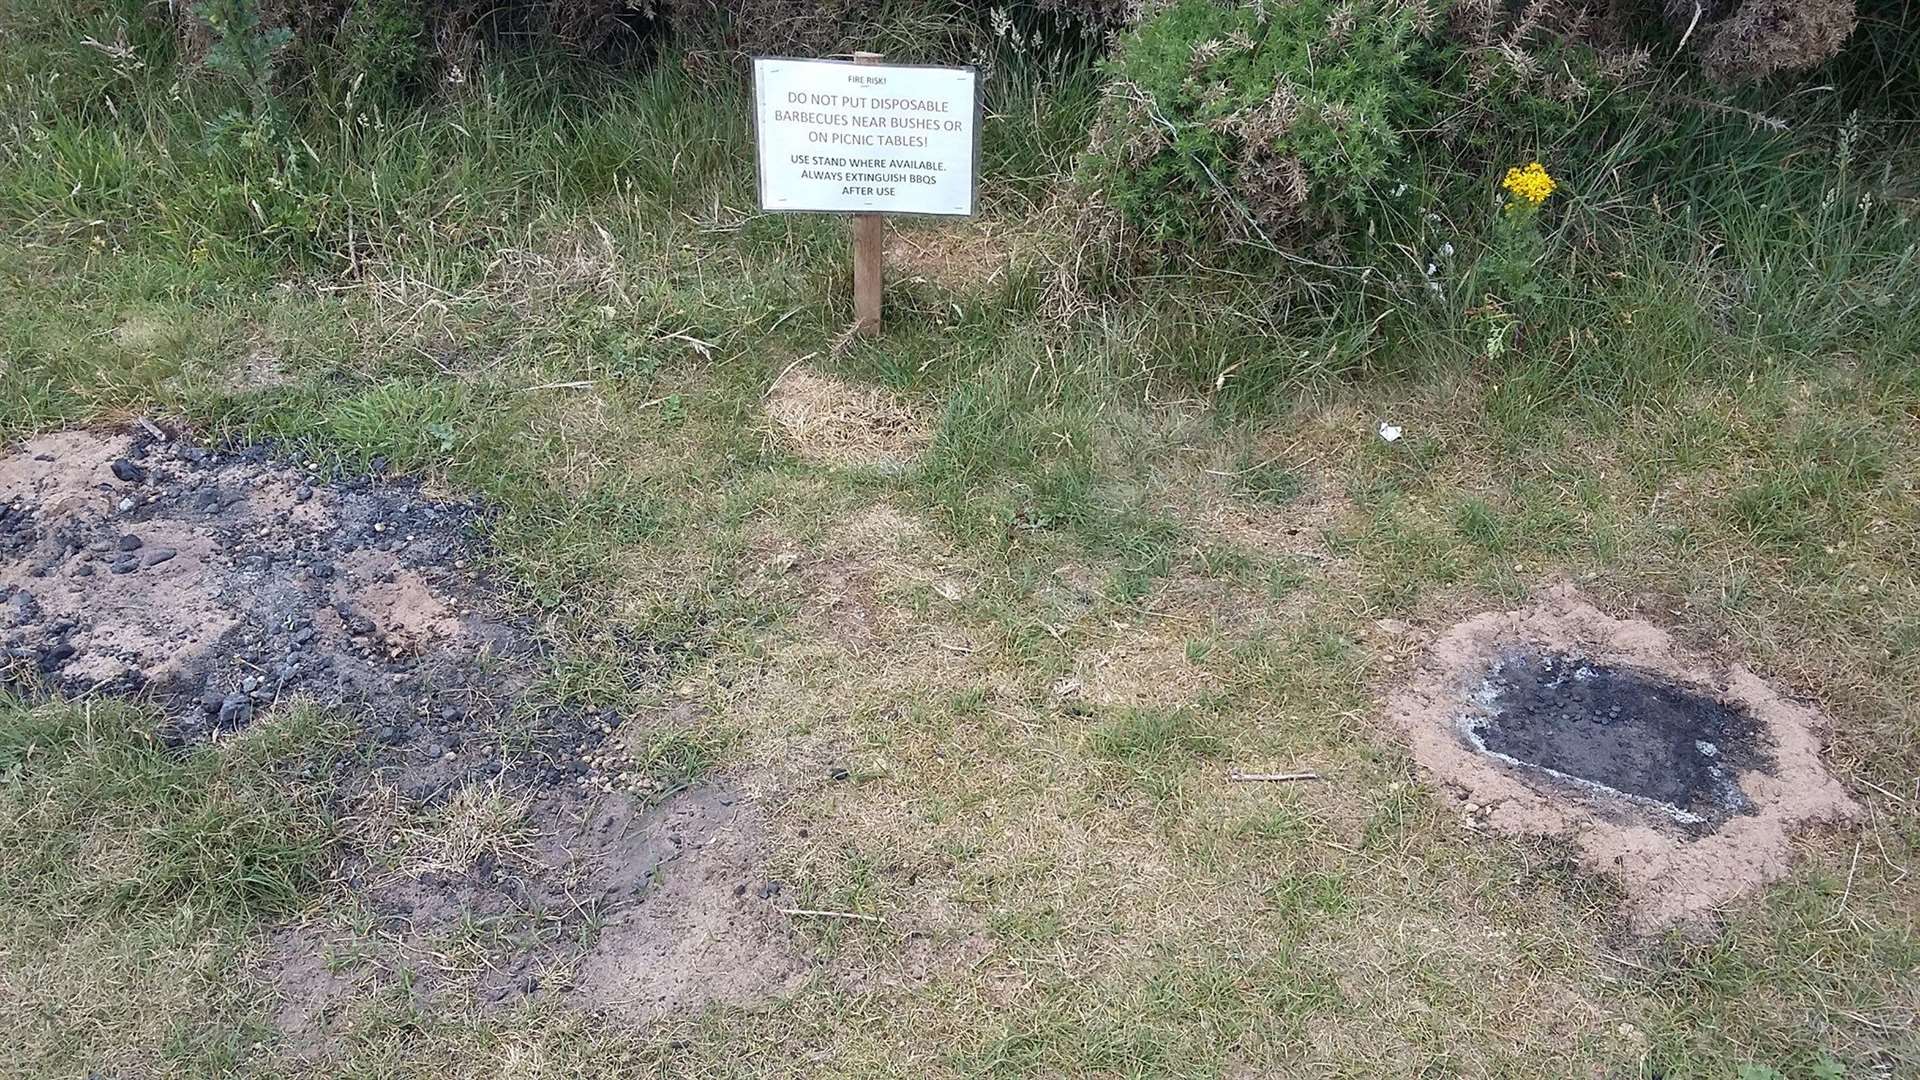 Disposable barbecues have caused issues at Balmedie